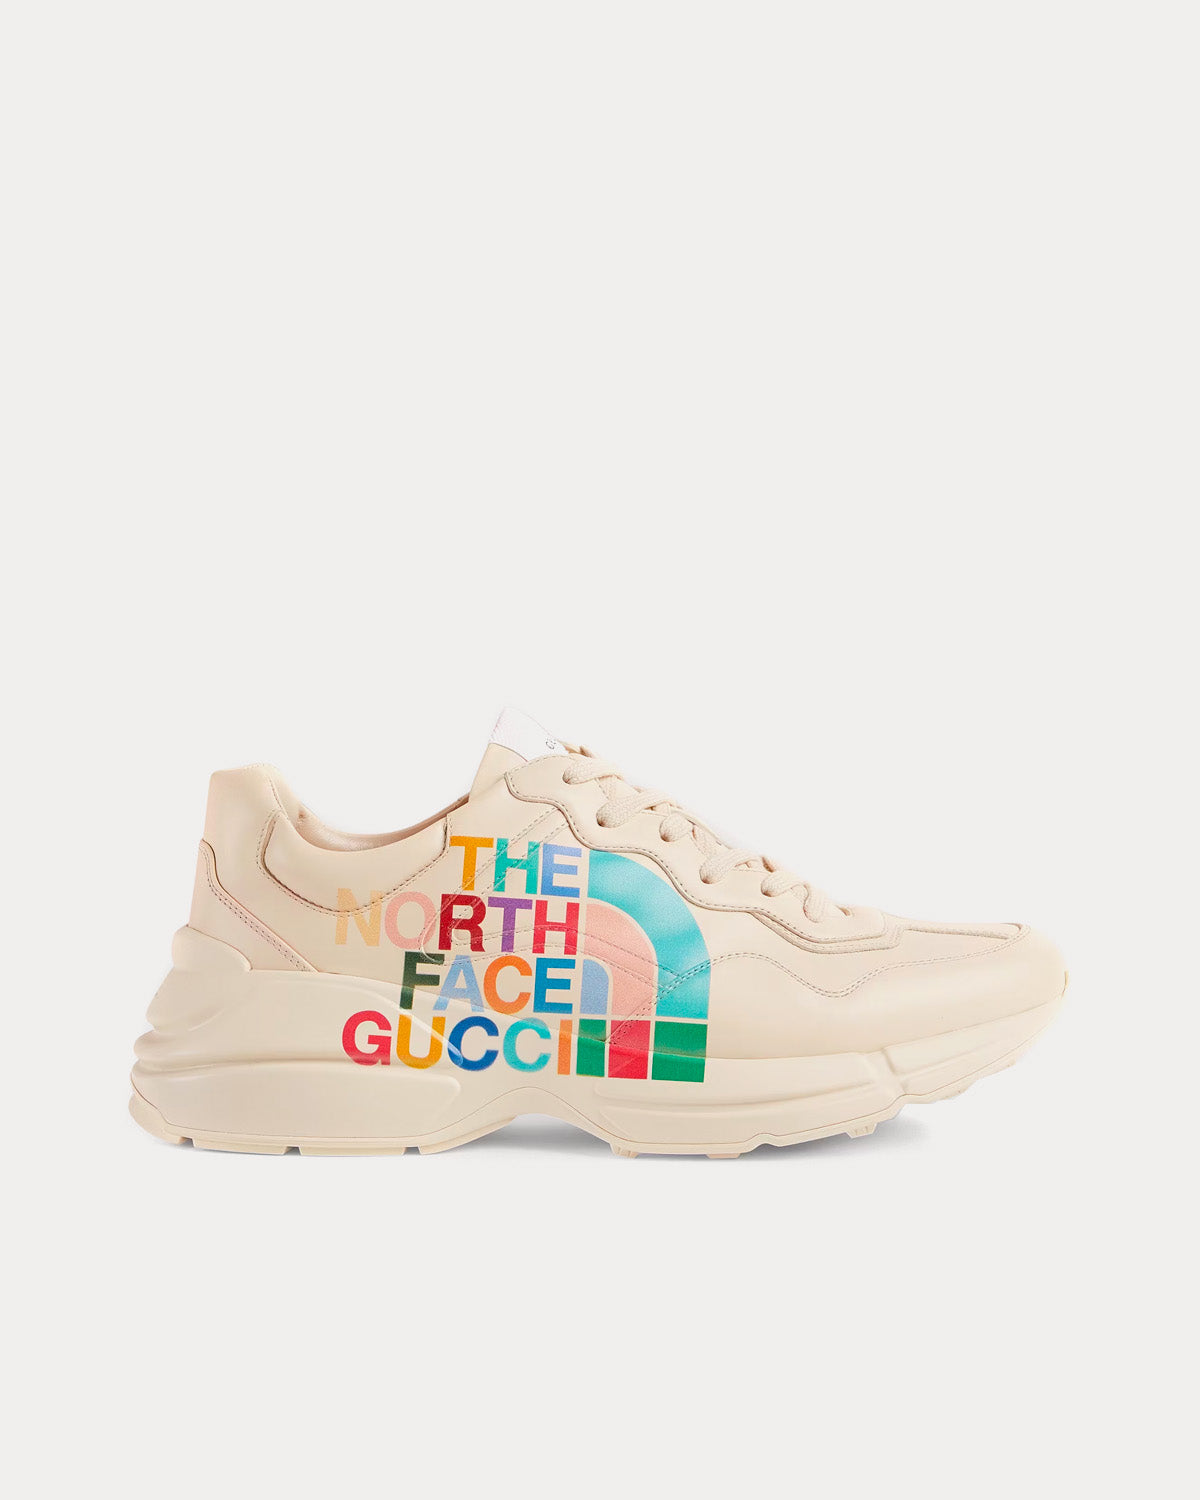 Gucci x The North Face - Rhyton Leather Ivory Low Top Sneakers